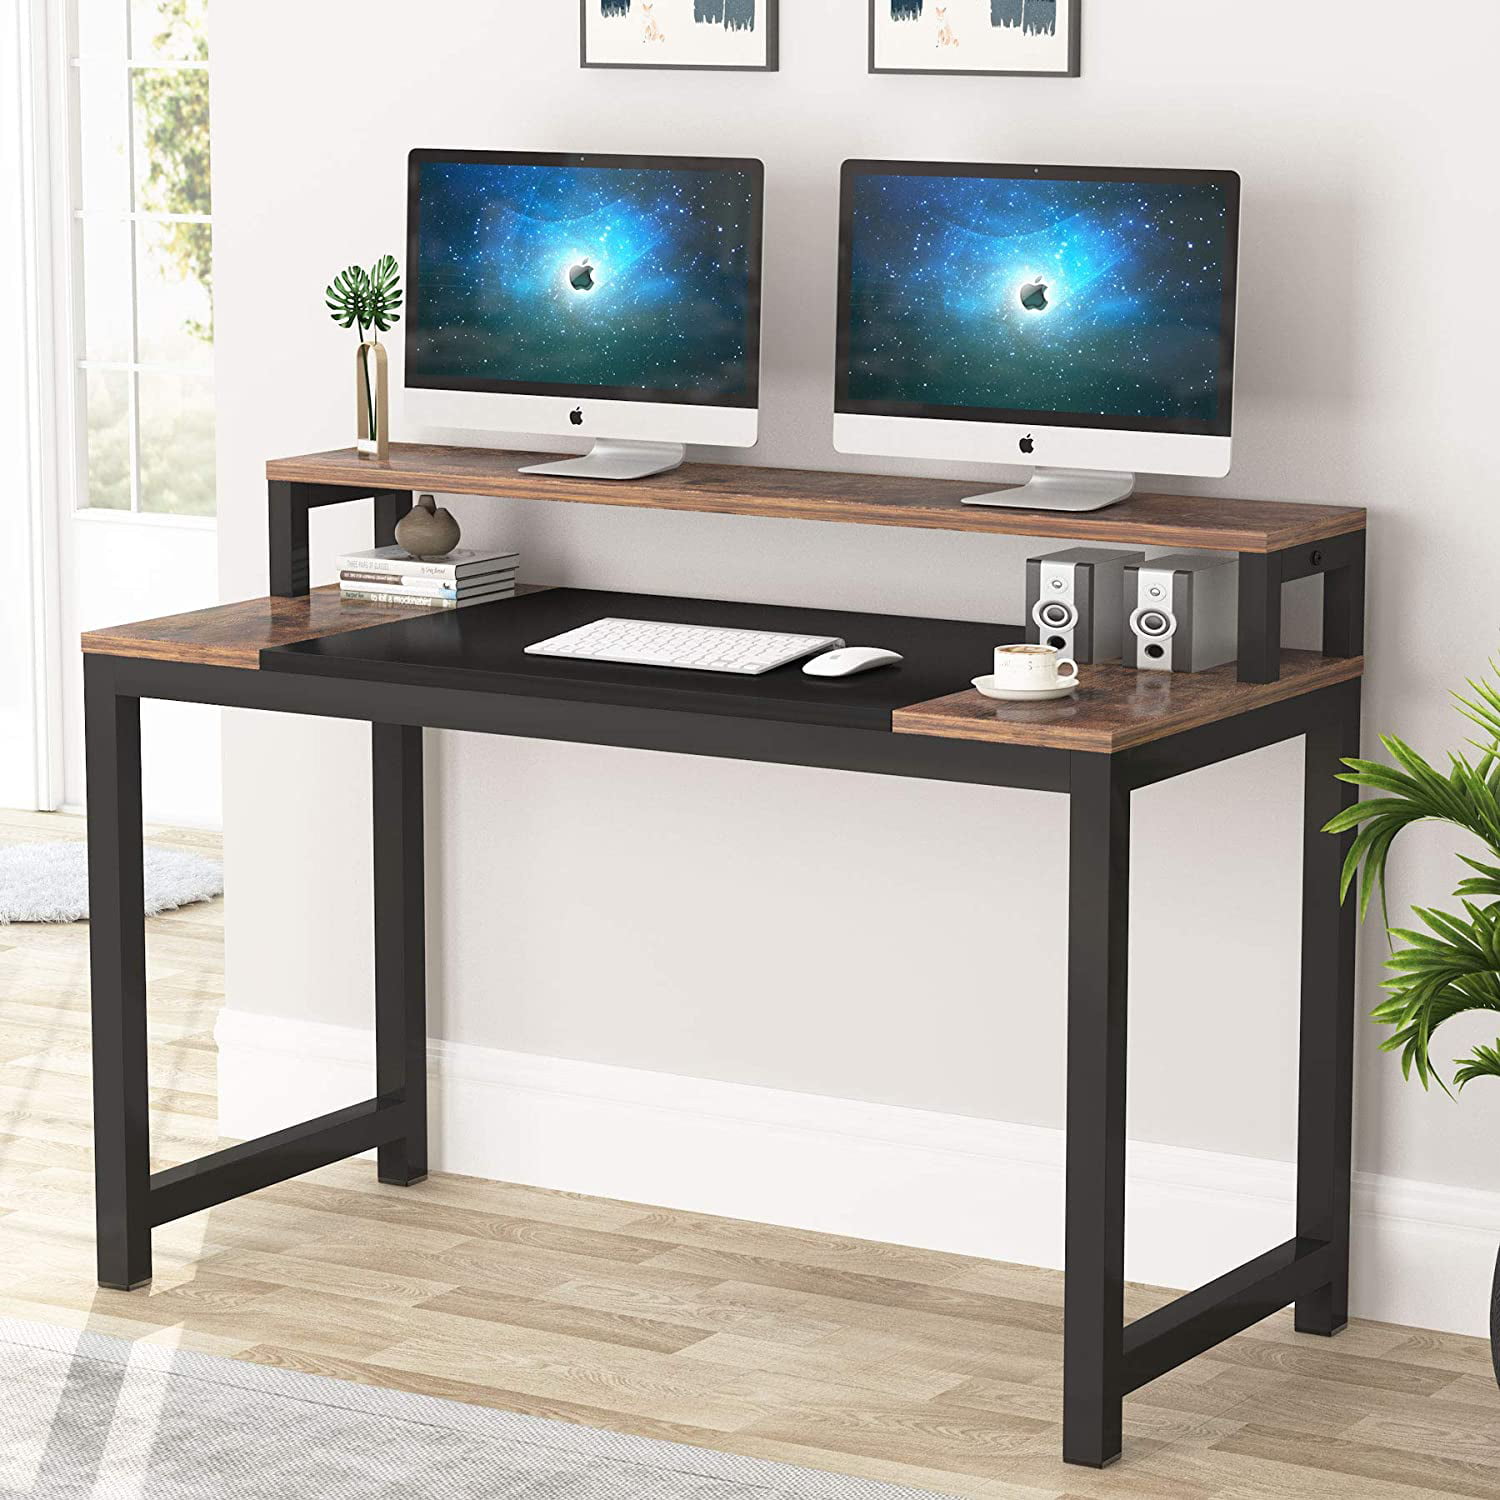 2 Shelves for Home Office Bedroom Easy To assemble Tribesigns Computer Desk Industrial Writing Desk for Study Computer Workstations PC Desk Table with Metal Frame Living Room Black